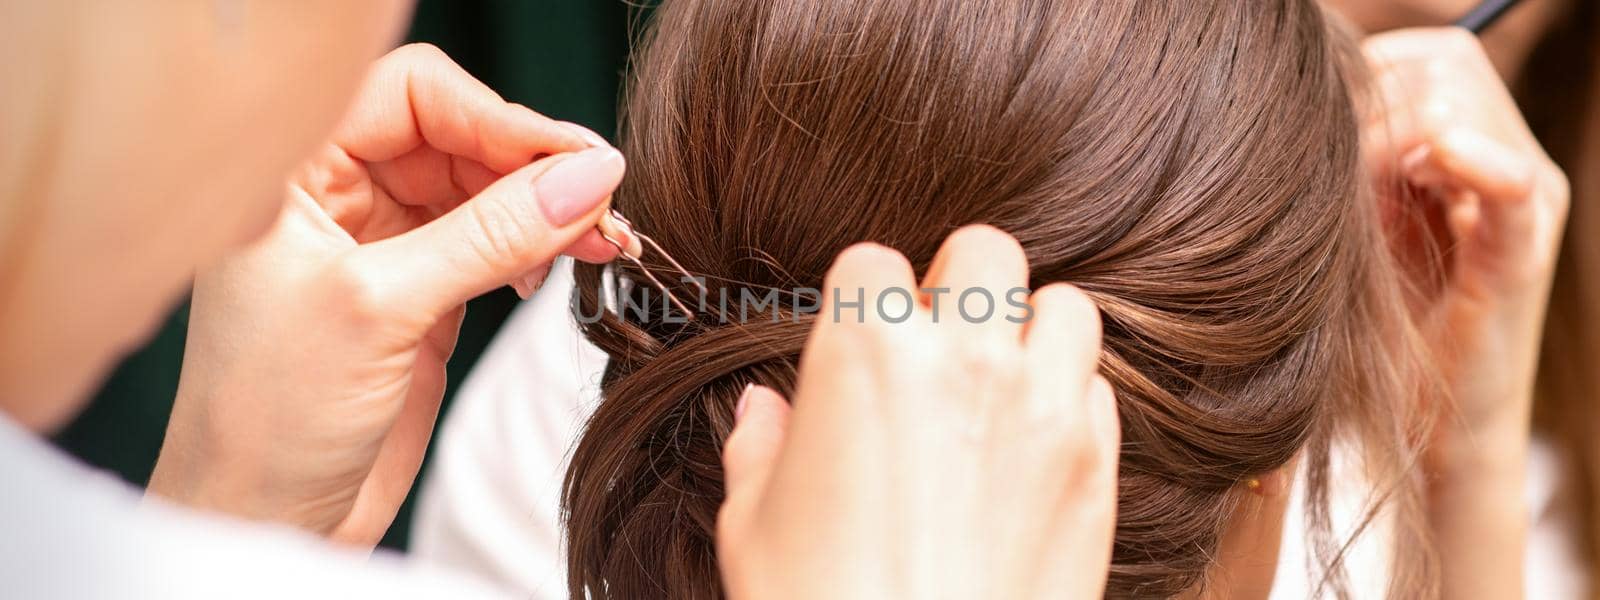 A hairdresser is making the hairstyle of a young brunette woman in a hair salon, close up